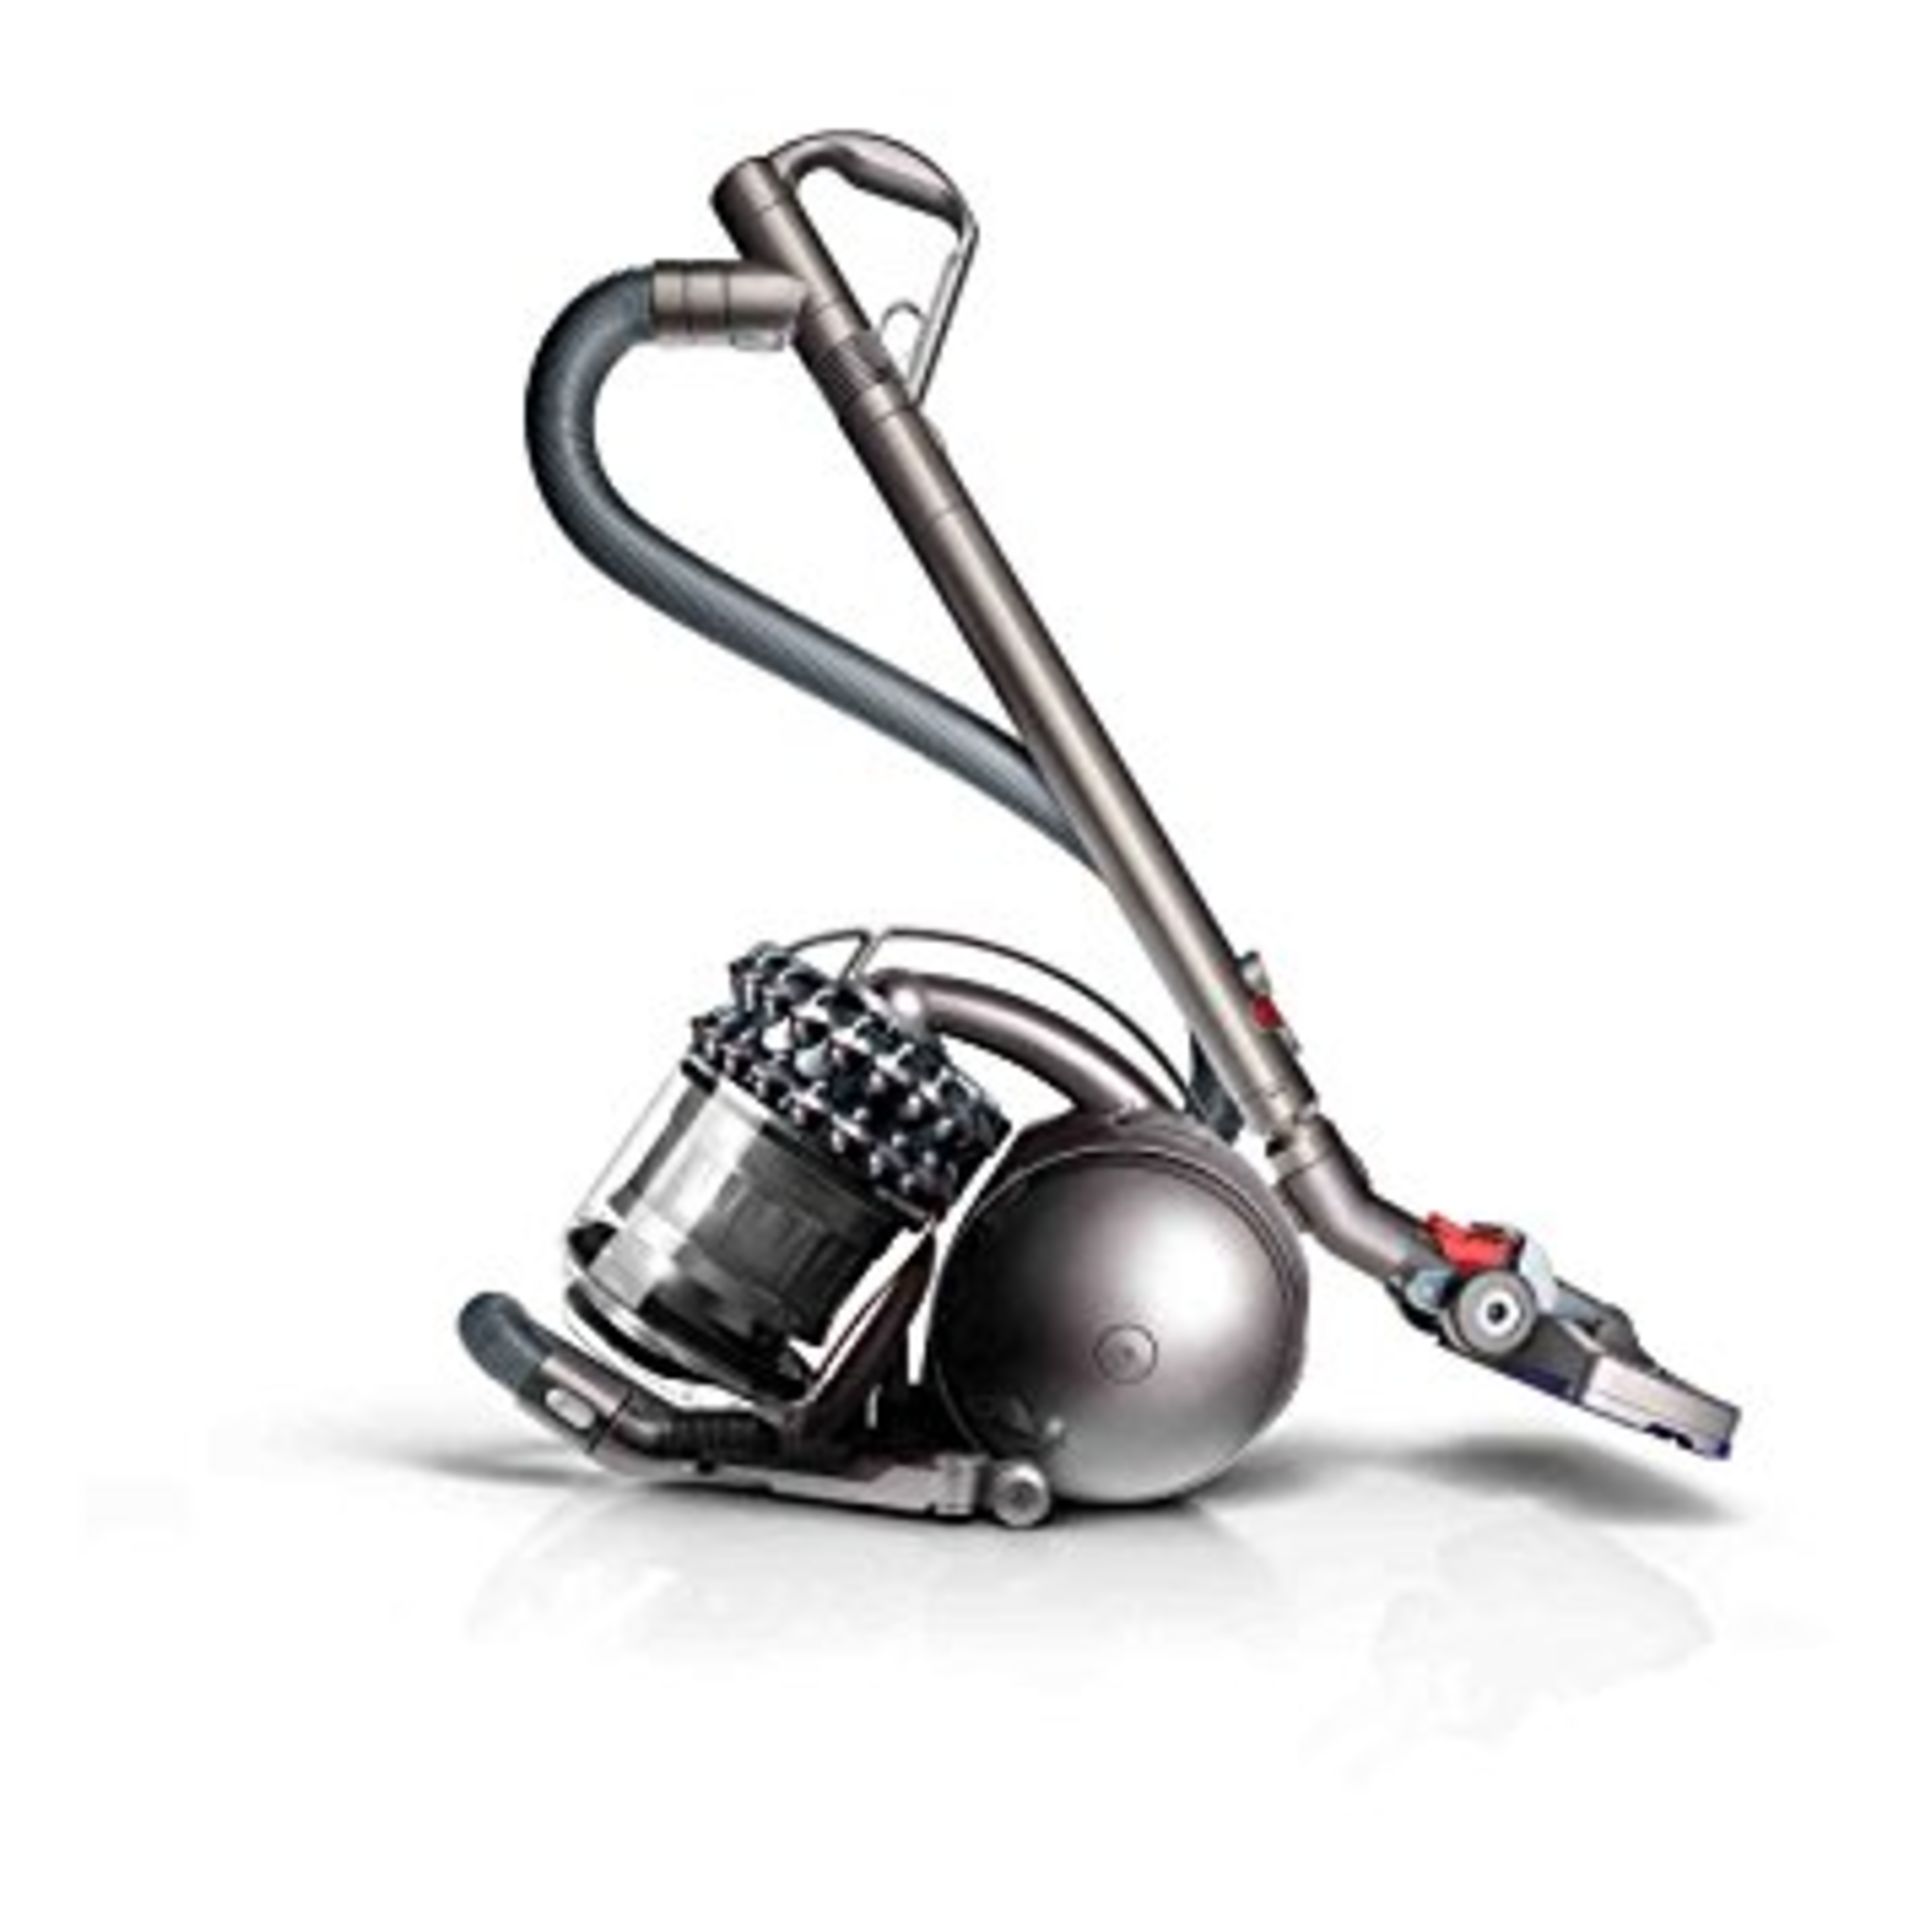 V Brand New Dyson DC54 Animal Extra Cylinder Bagless Vacuum Cleaner with Efficient Cinetic